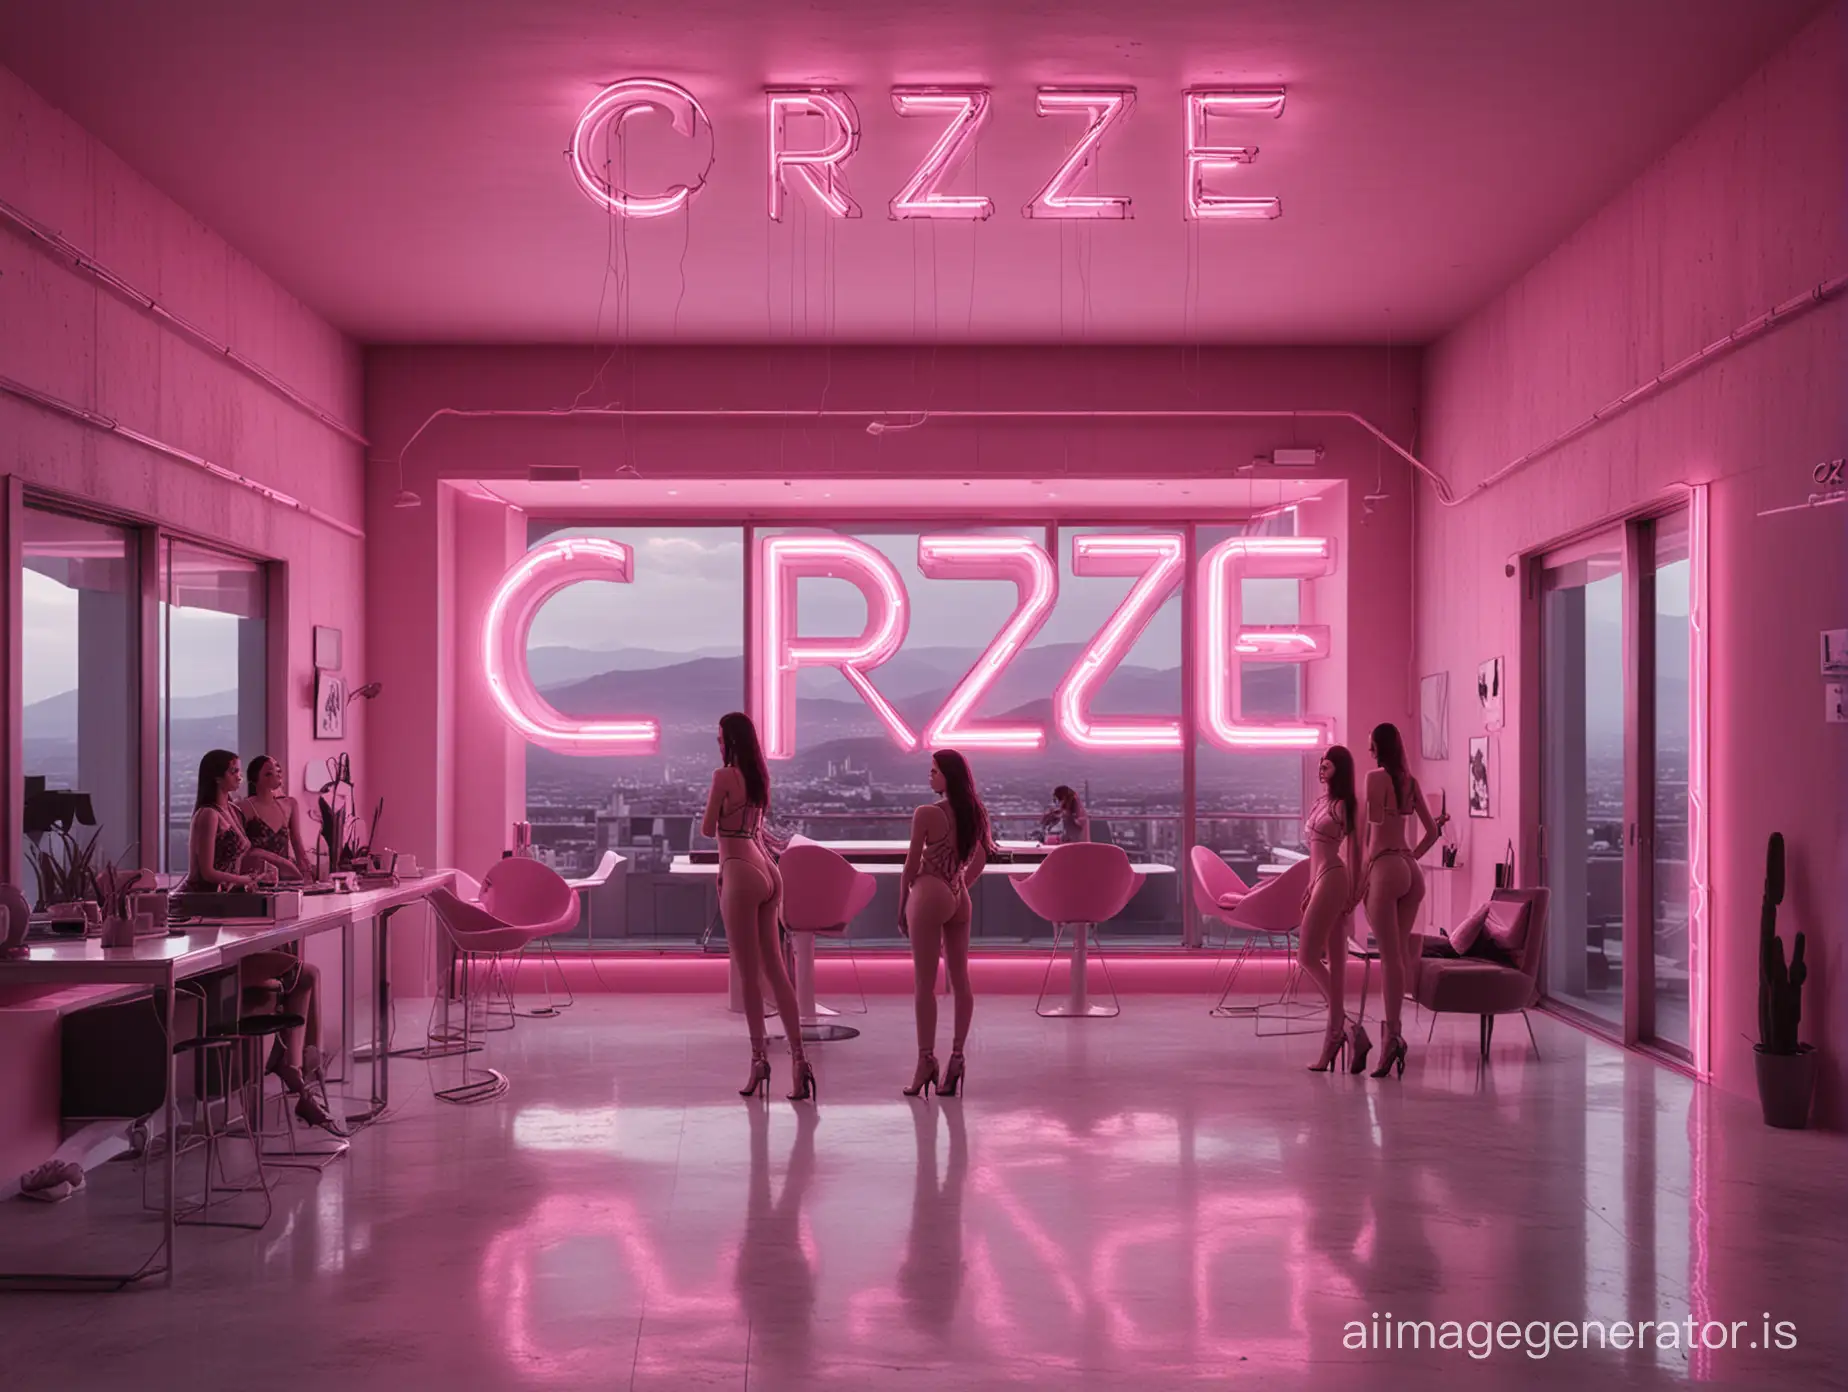 a futuristic ultra modern penthouse with sexy girls and large pink neon sign with the word "CRZZE", high windows looking out to a dystopian landscape